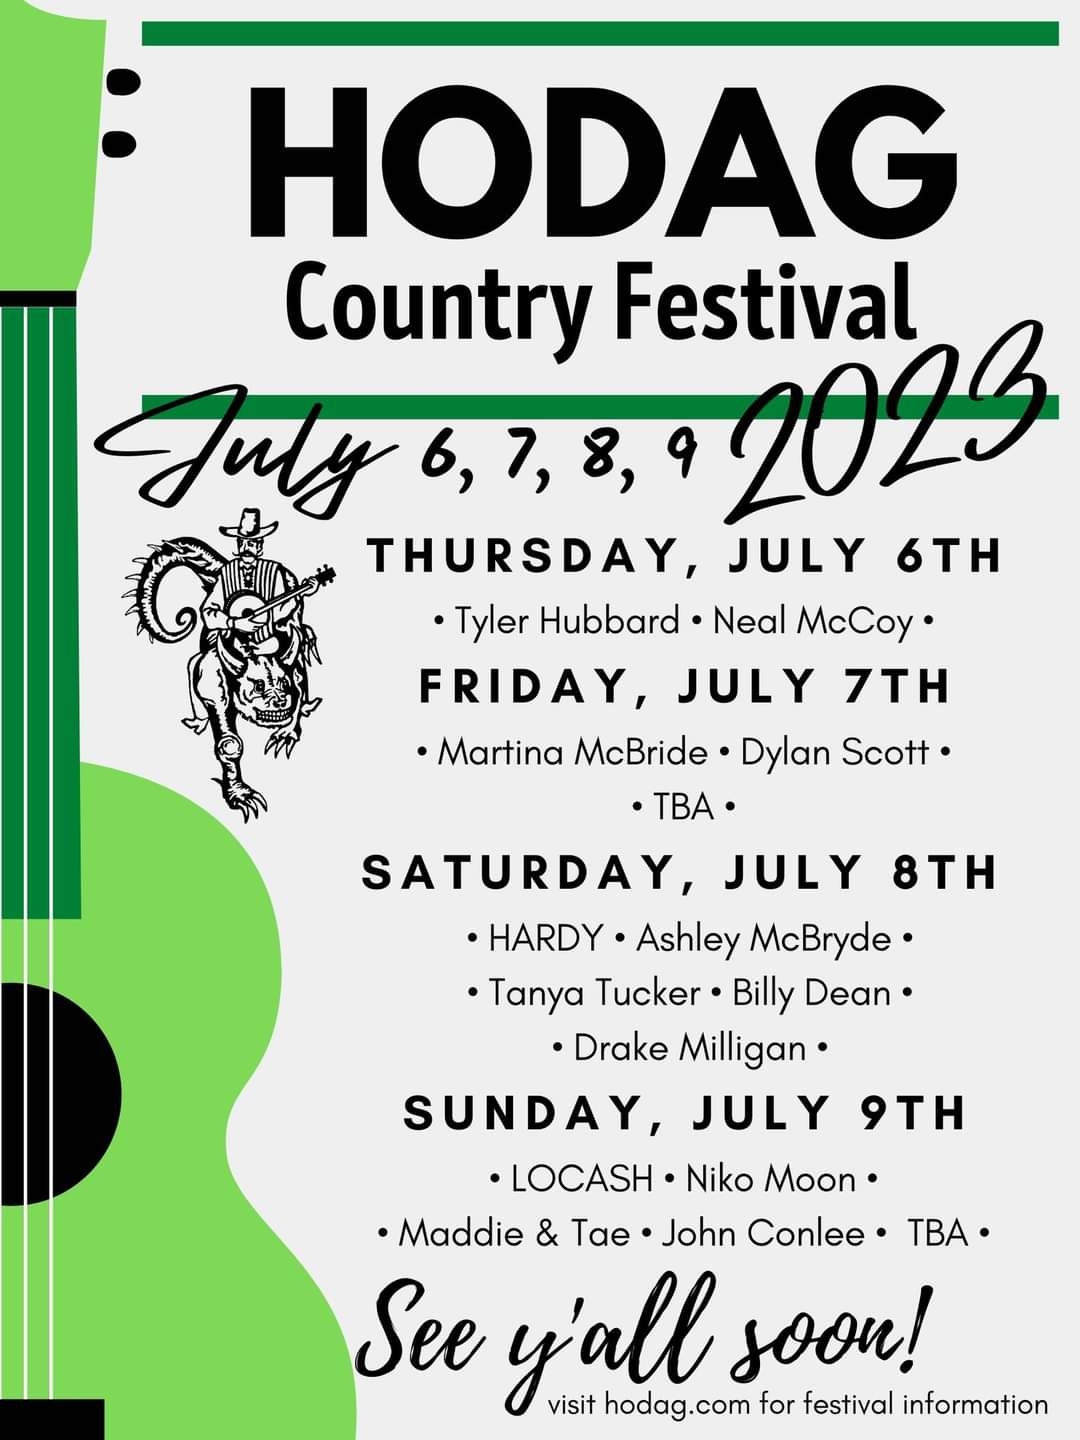 Hodag Country Festival: Hardy, Ashley McBryde & Tanya Tucker - Saturday Pass at Hardy Concerts